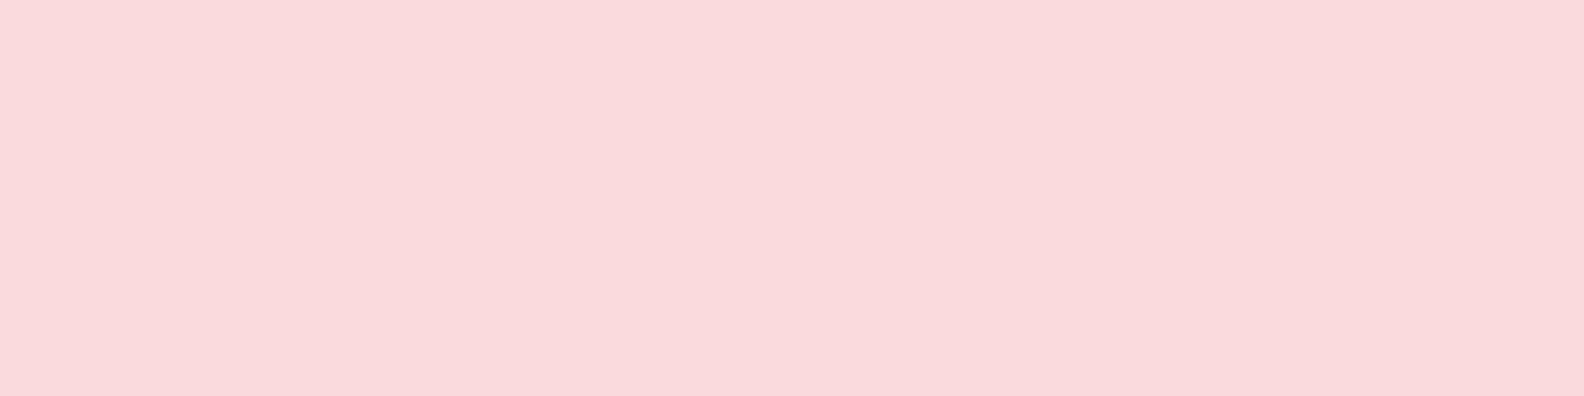 1584x396 Pale Pink Solid Color Background